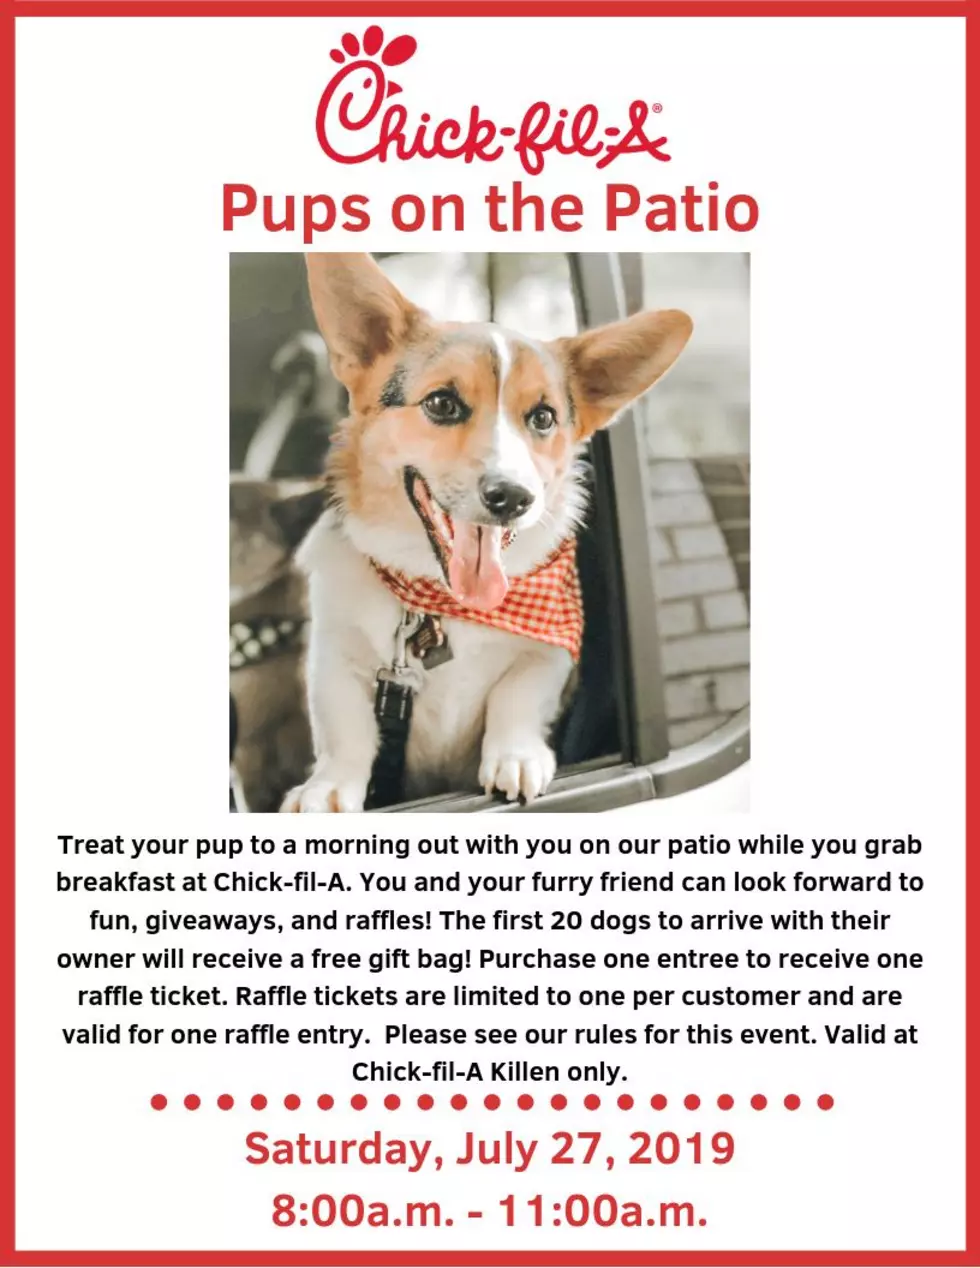 Enjoy Chick-fil-A With Your Pups